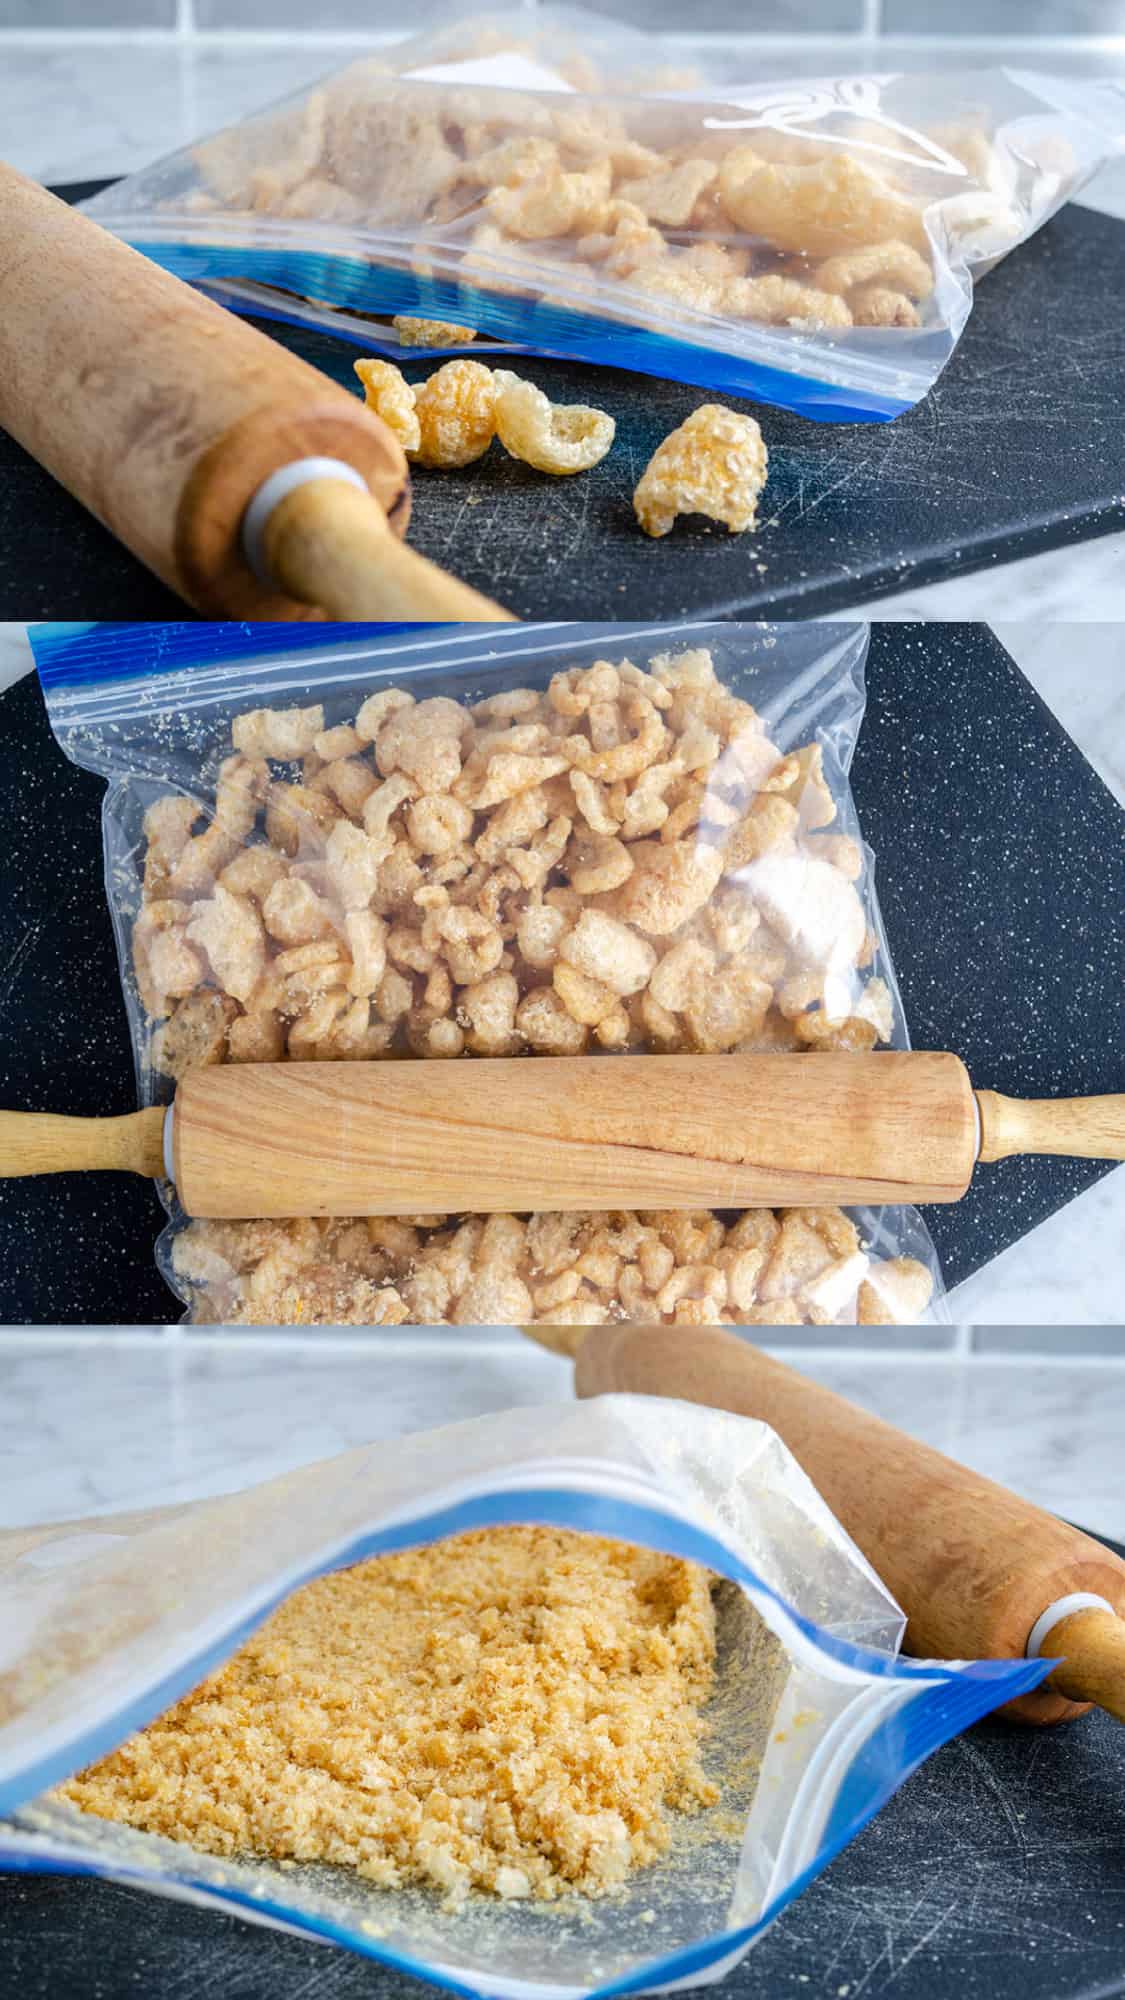 A series of how to make pork rind panko images